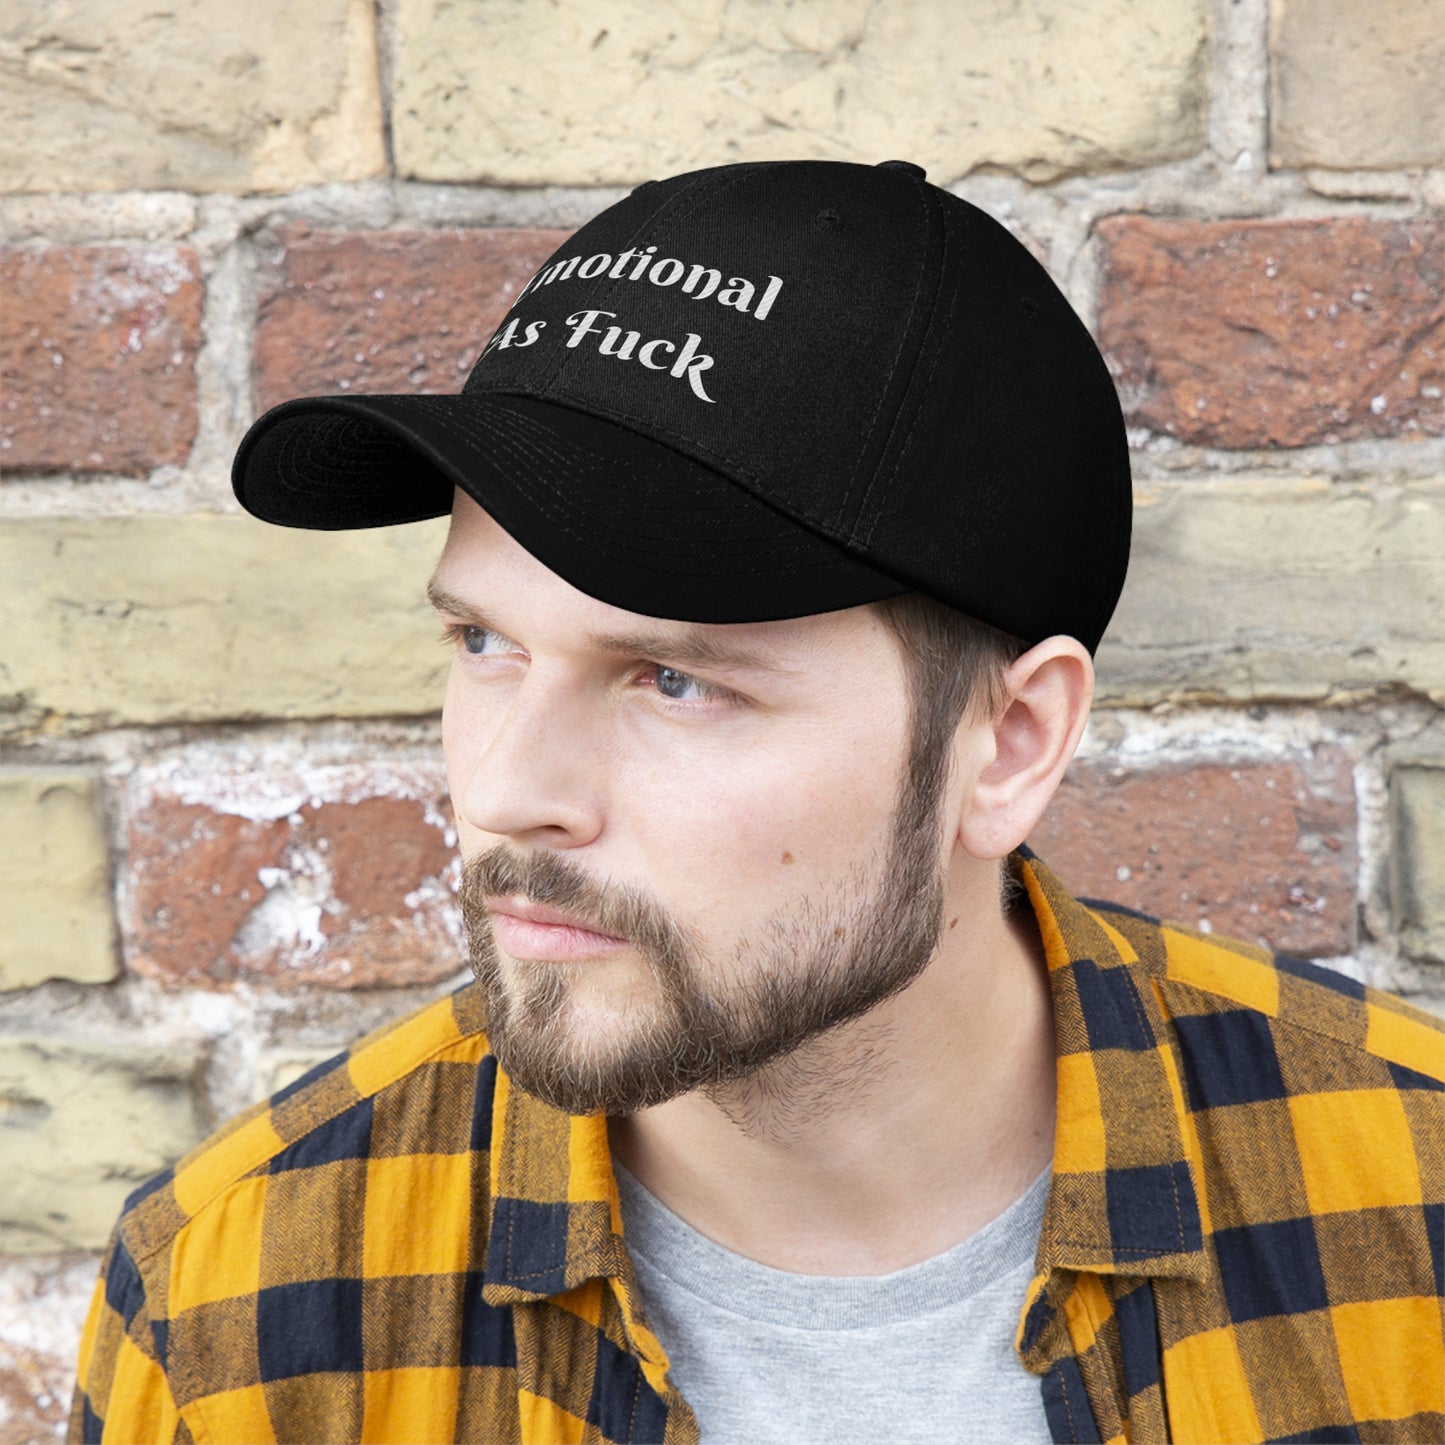 Emotional as Fuck Embroidered Hat for Authentic Expression